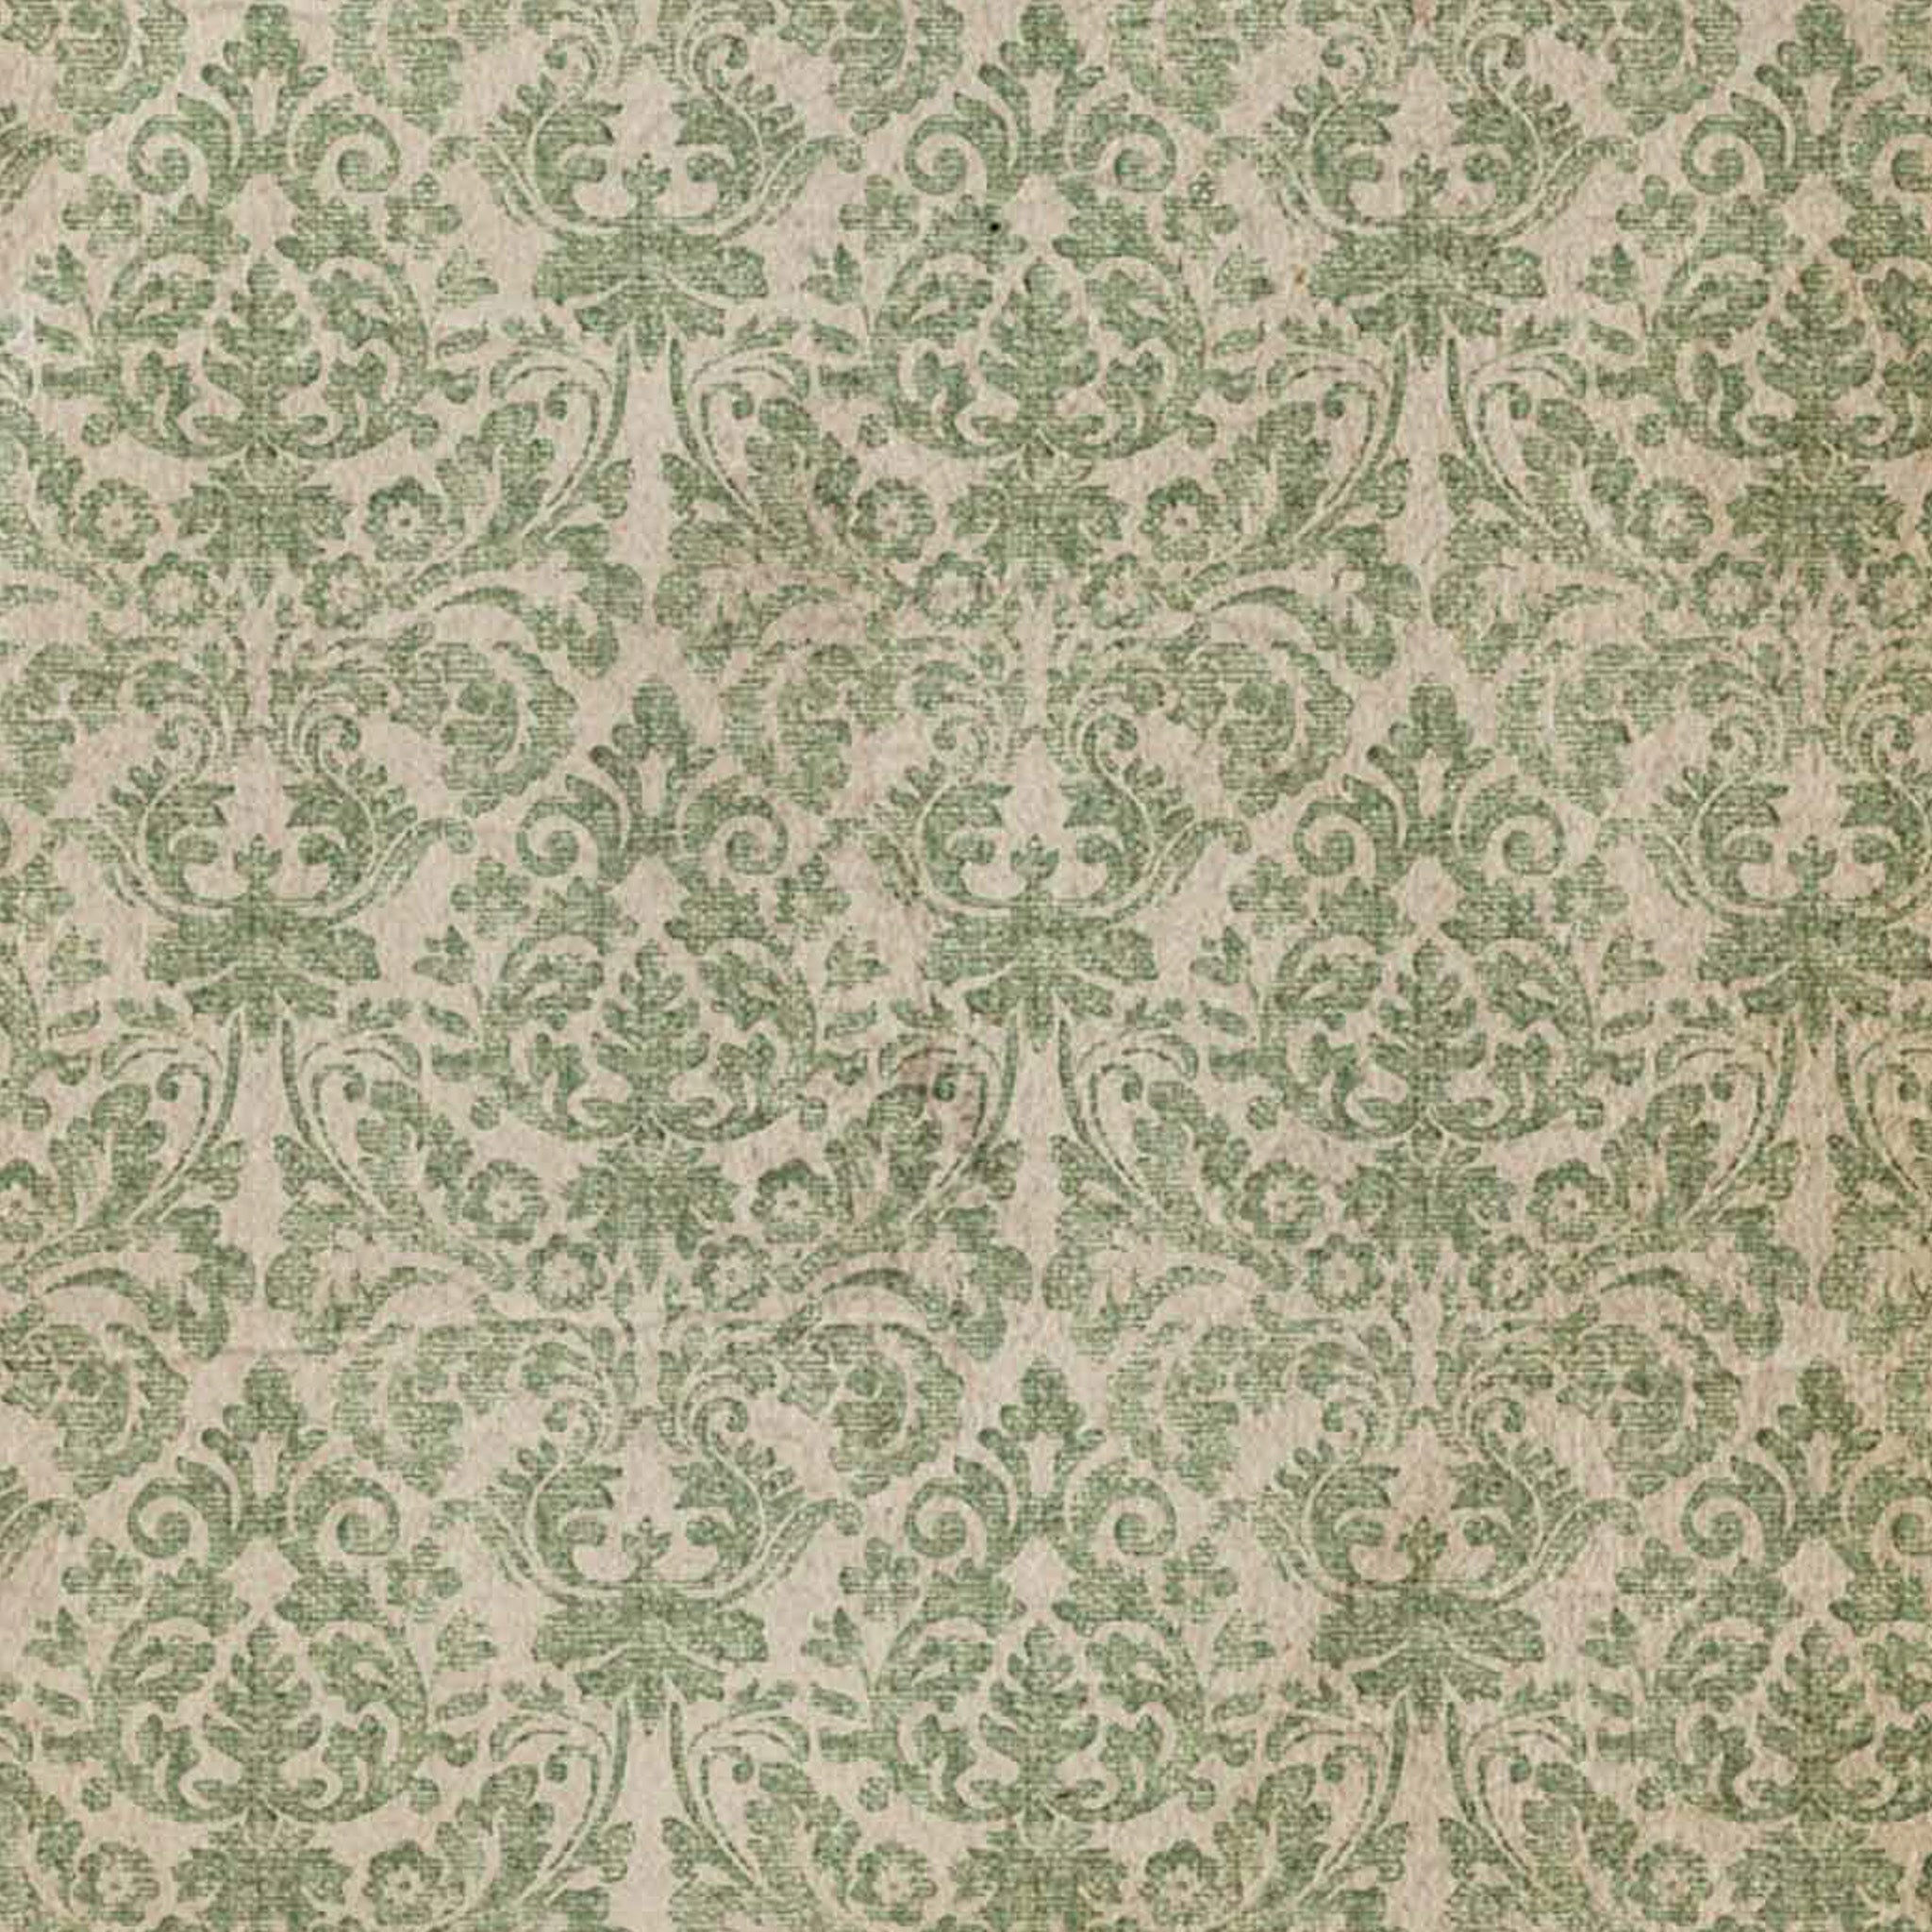 Vintage style Wallpaper Damask A1 Decoupage Rice Paper close up.